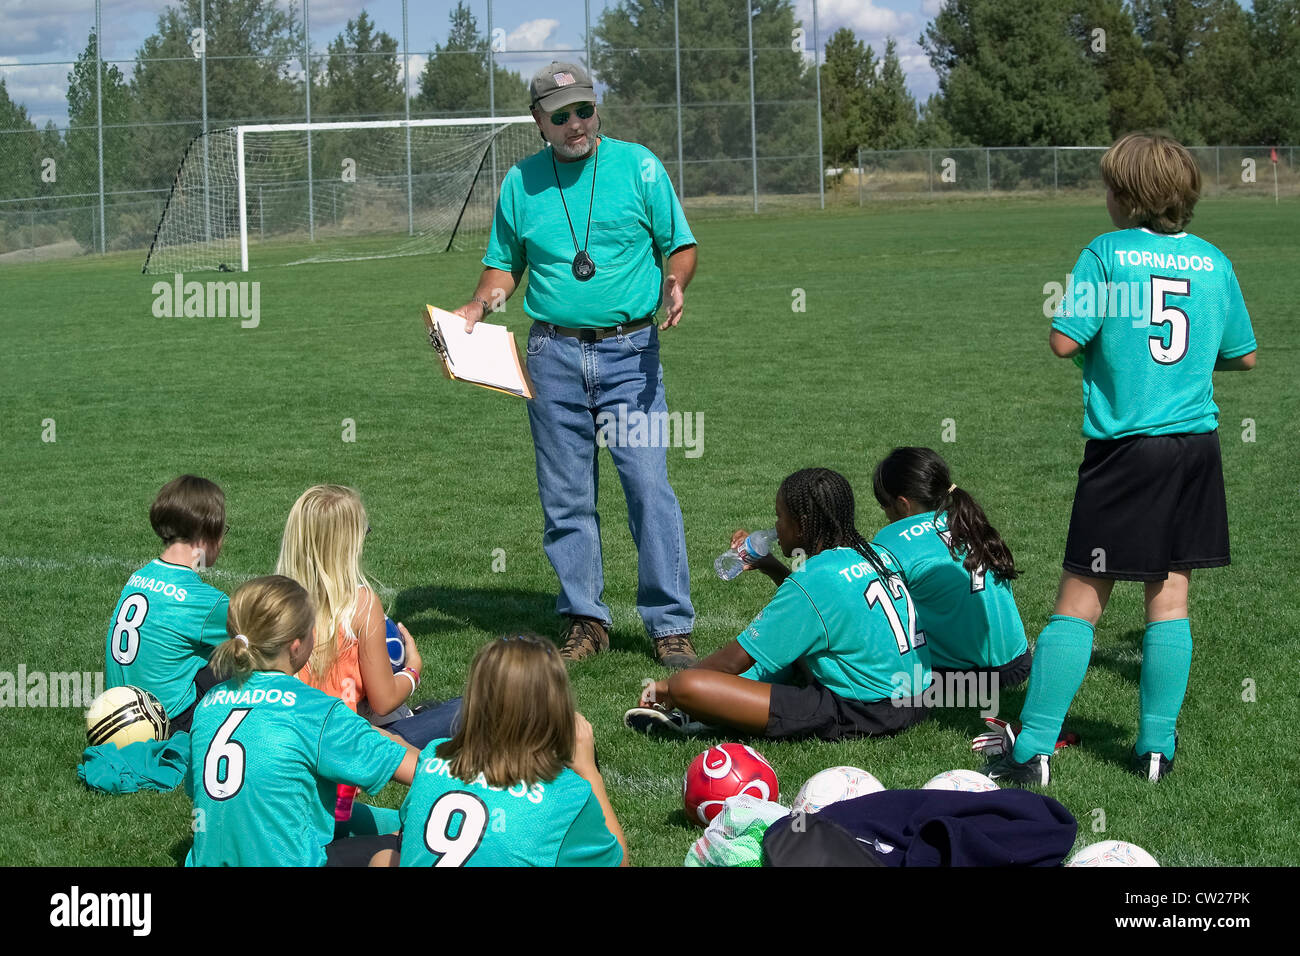 The male coach gives a pep talk while a young girls' team rests on the playing field between after-school soccer matches in Bend, Oregon, USA. Stock Photo